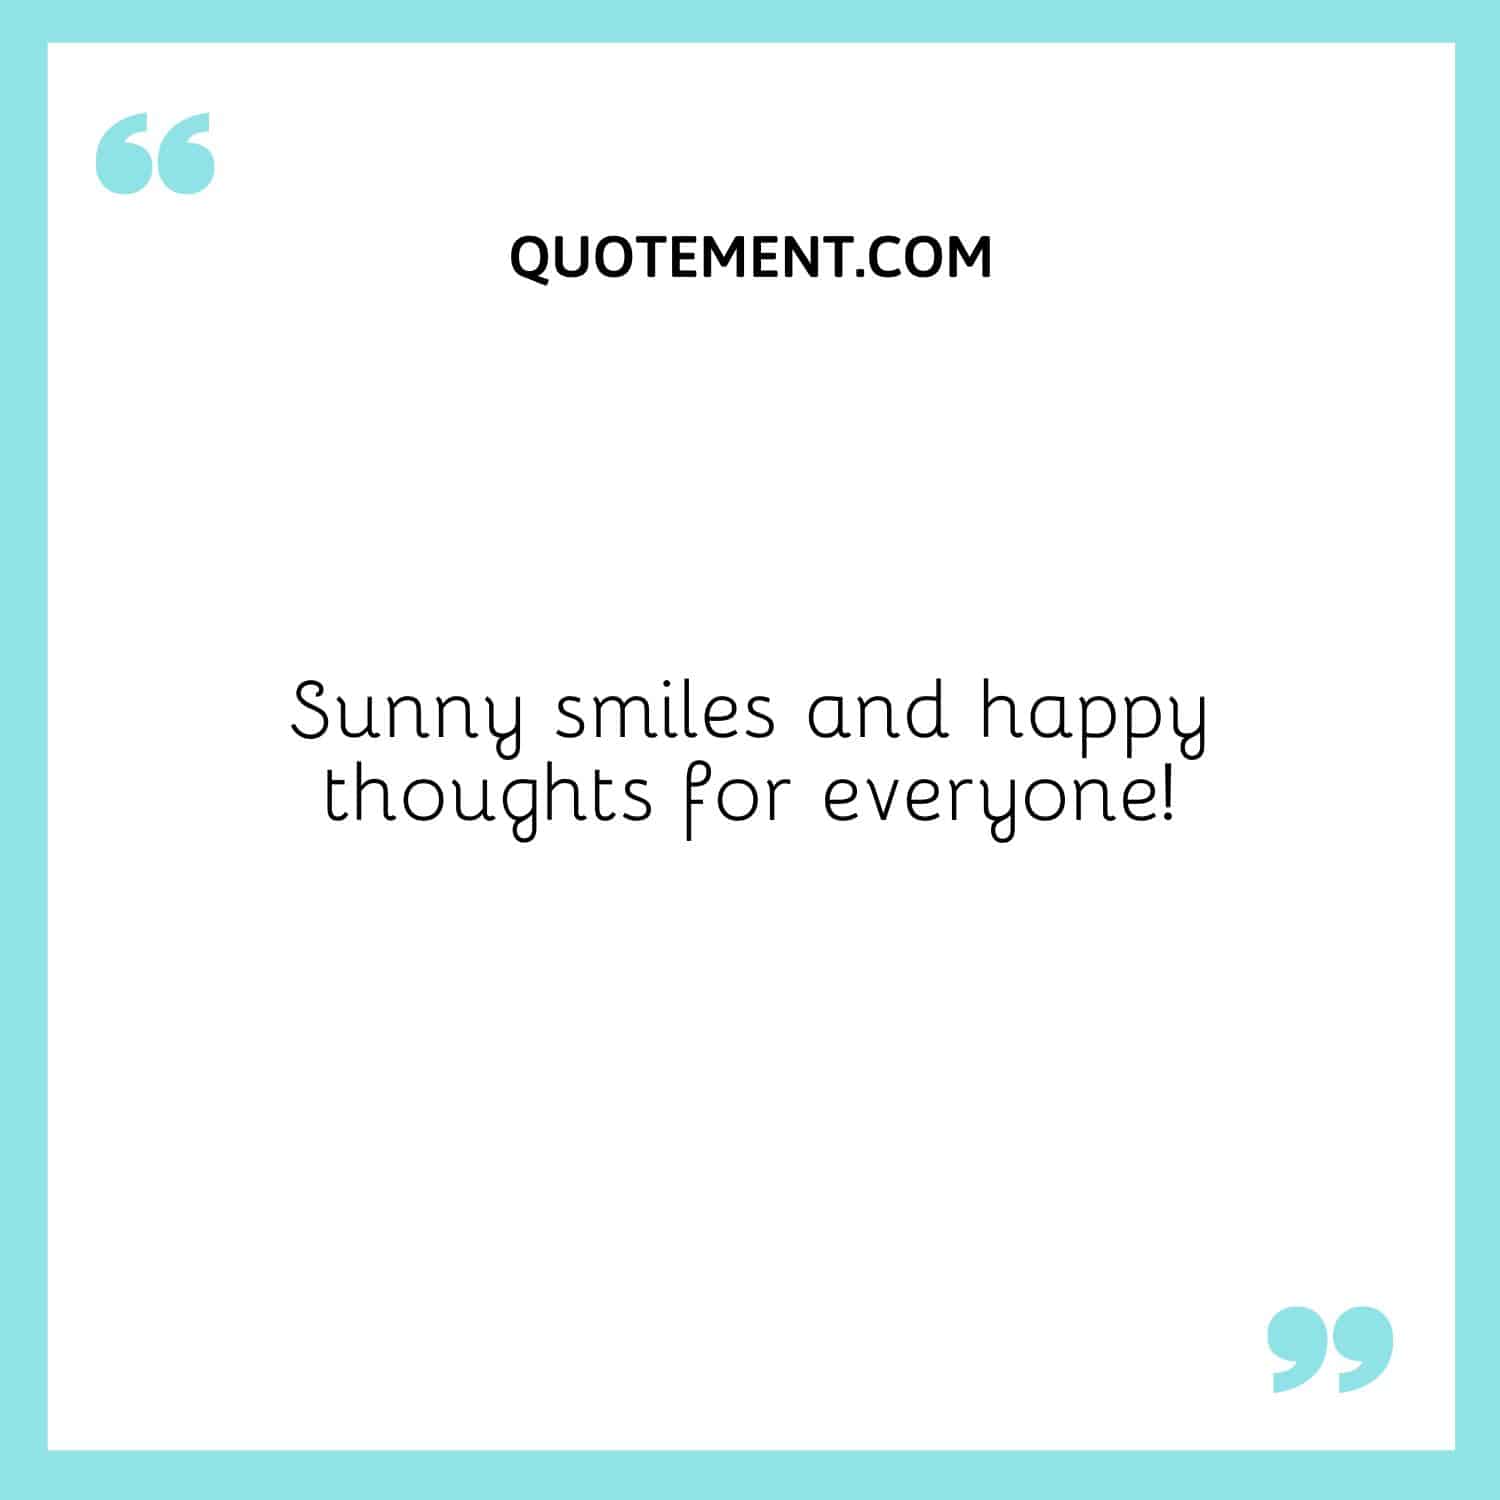 Sunny smiles and happy thoughts for everyone!